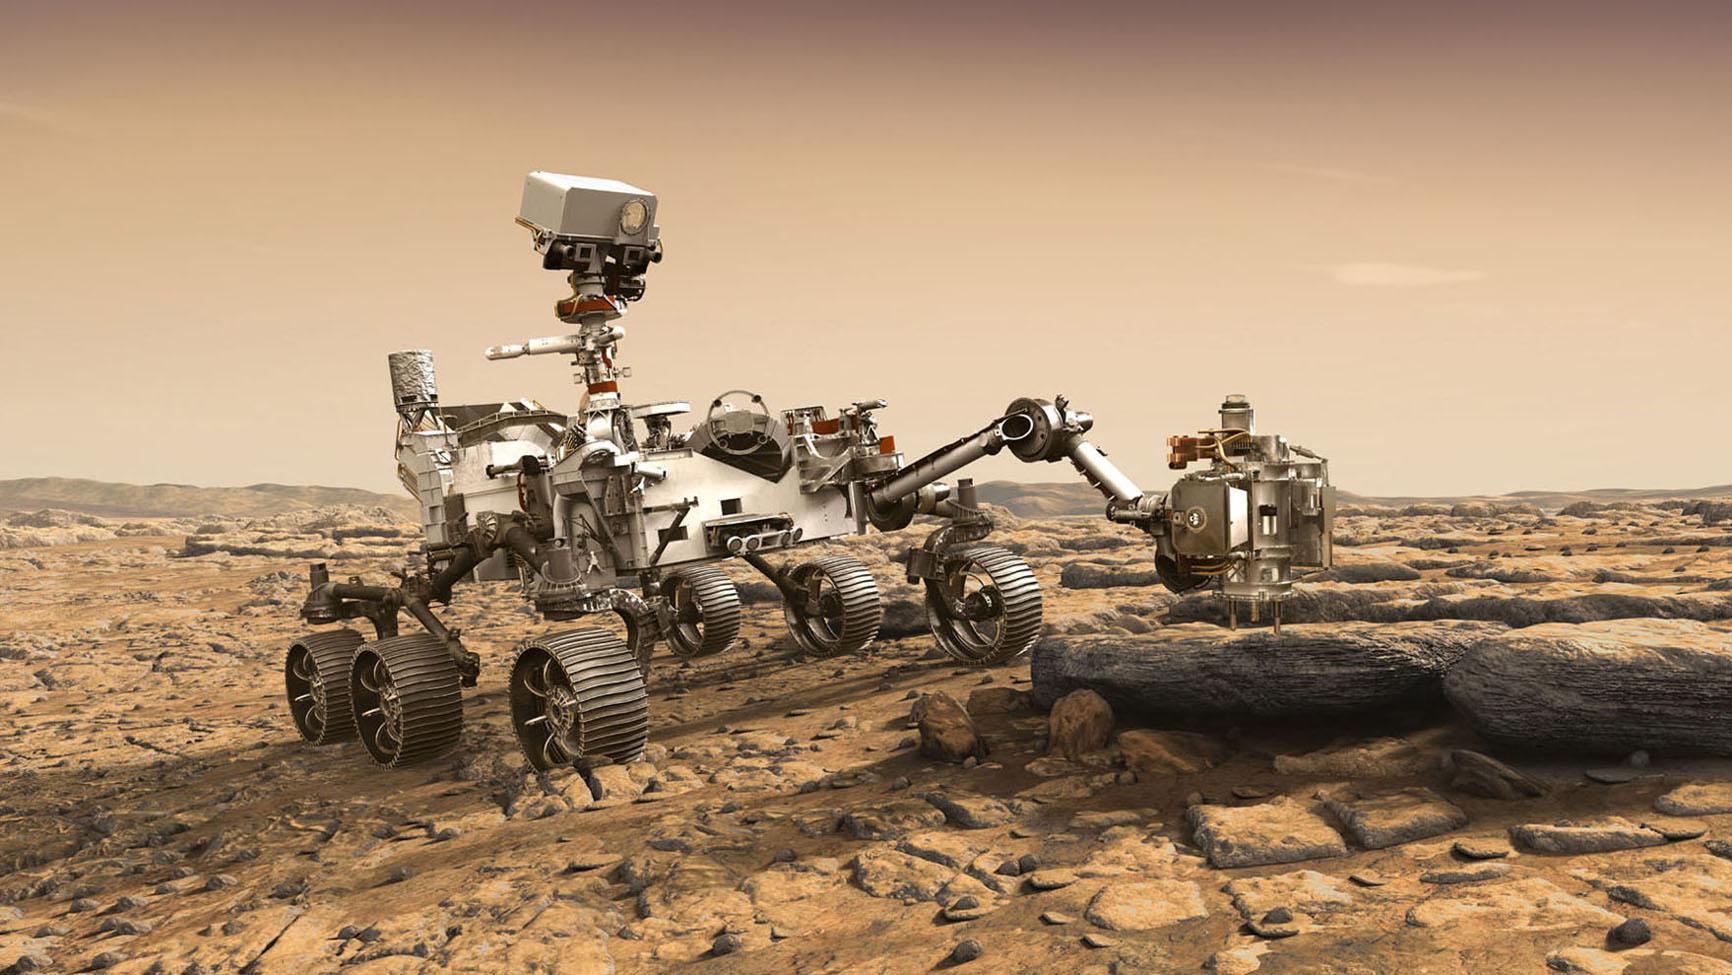 This artist's rendition depicts NASA's Mars 2020 rover studying a Mars rock outrcrop